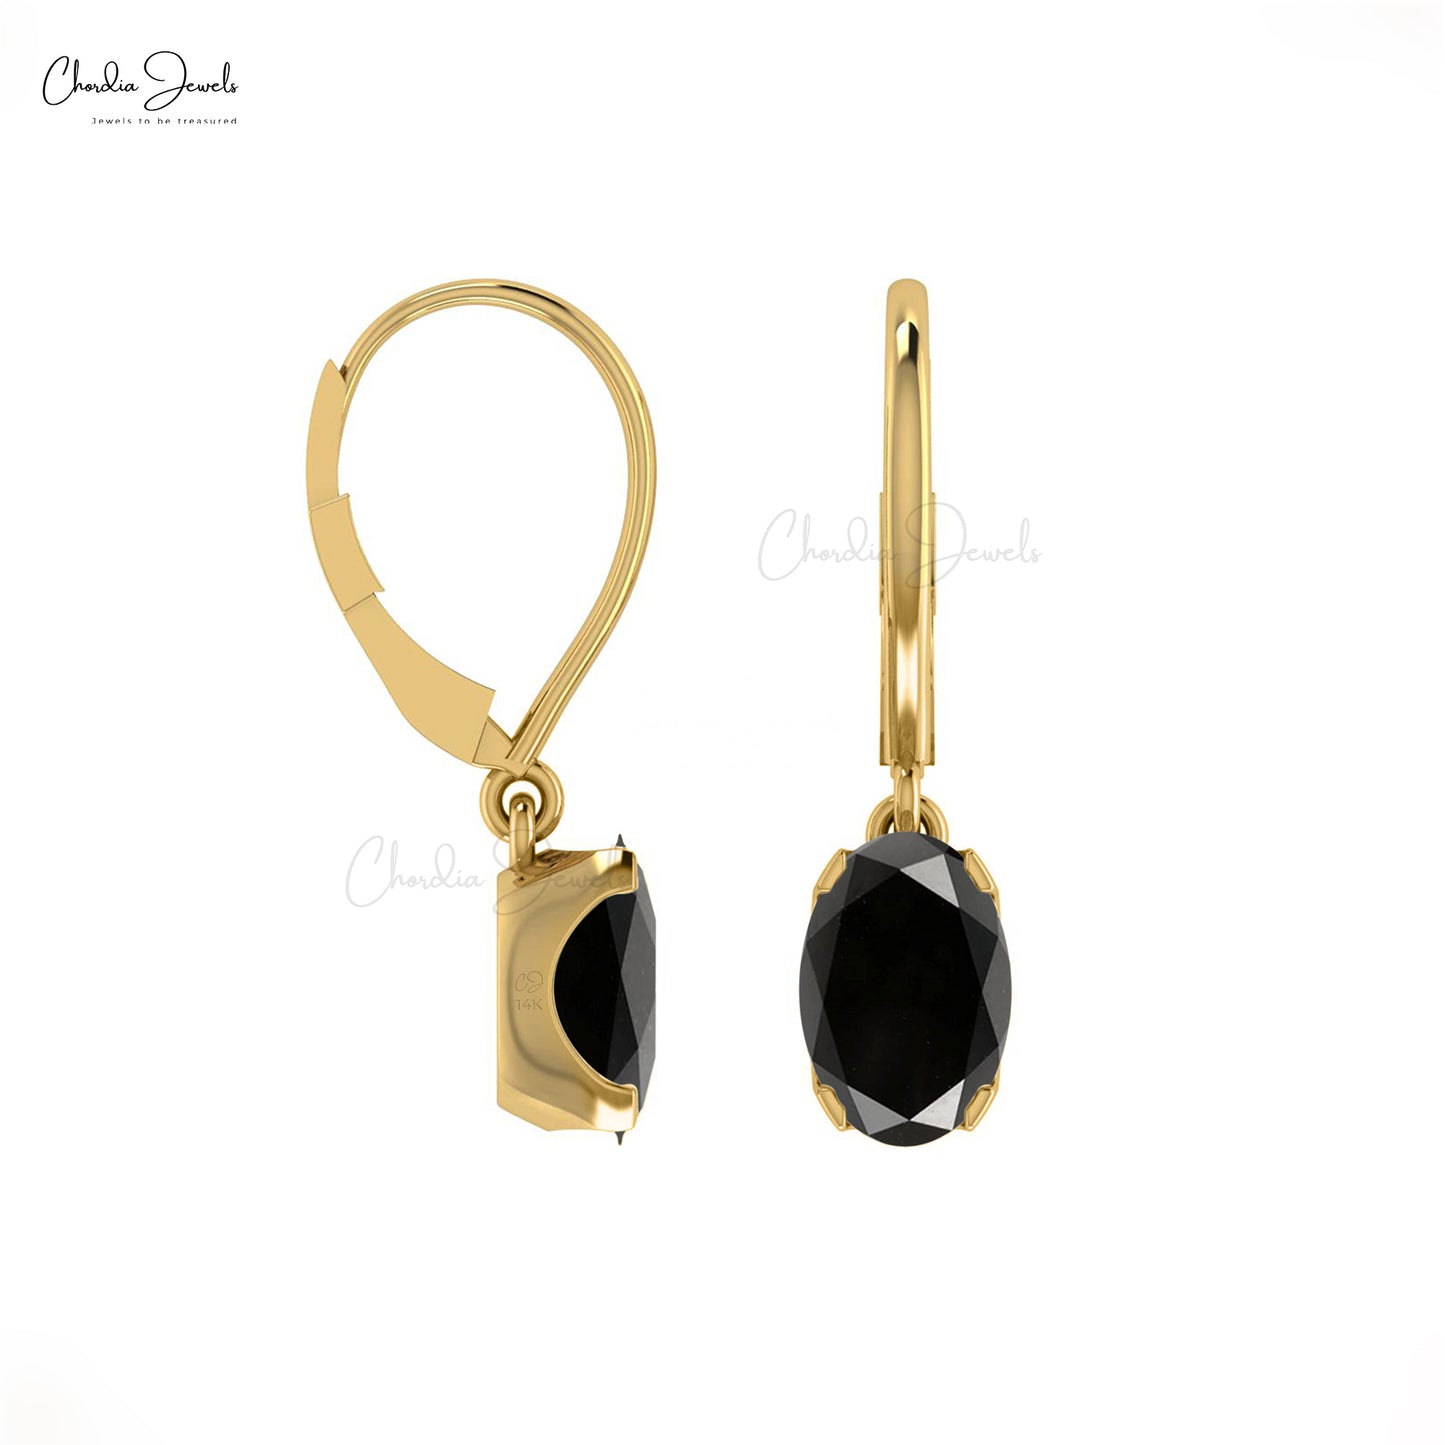 Load image into Gallery viewer, Authentic Black Diamond Dangle Earrings in 14k Real Gold Delicate Earring For Birthday Gift
